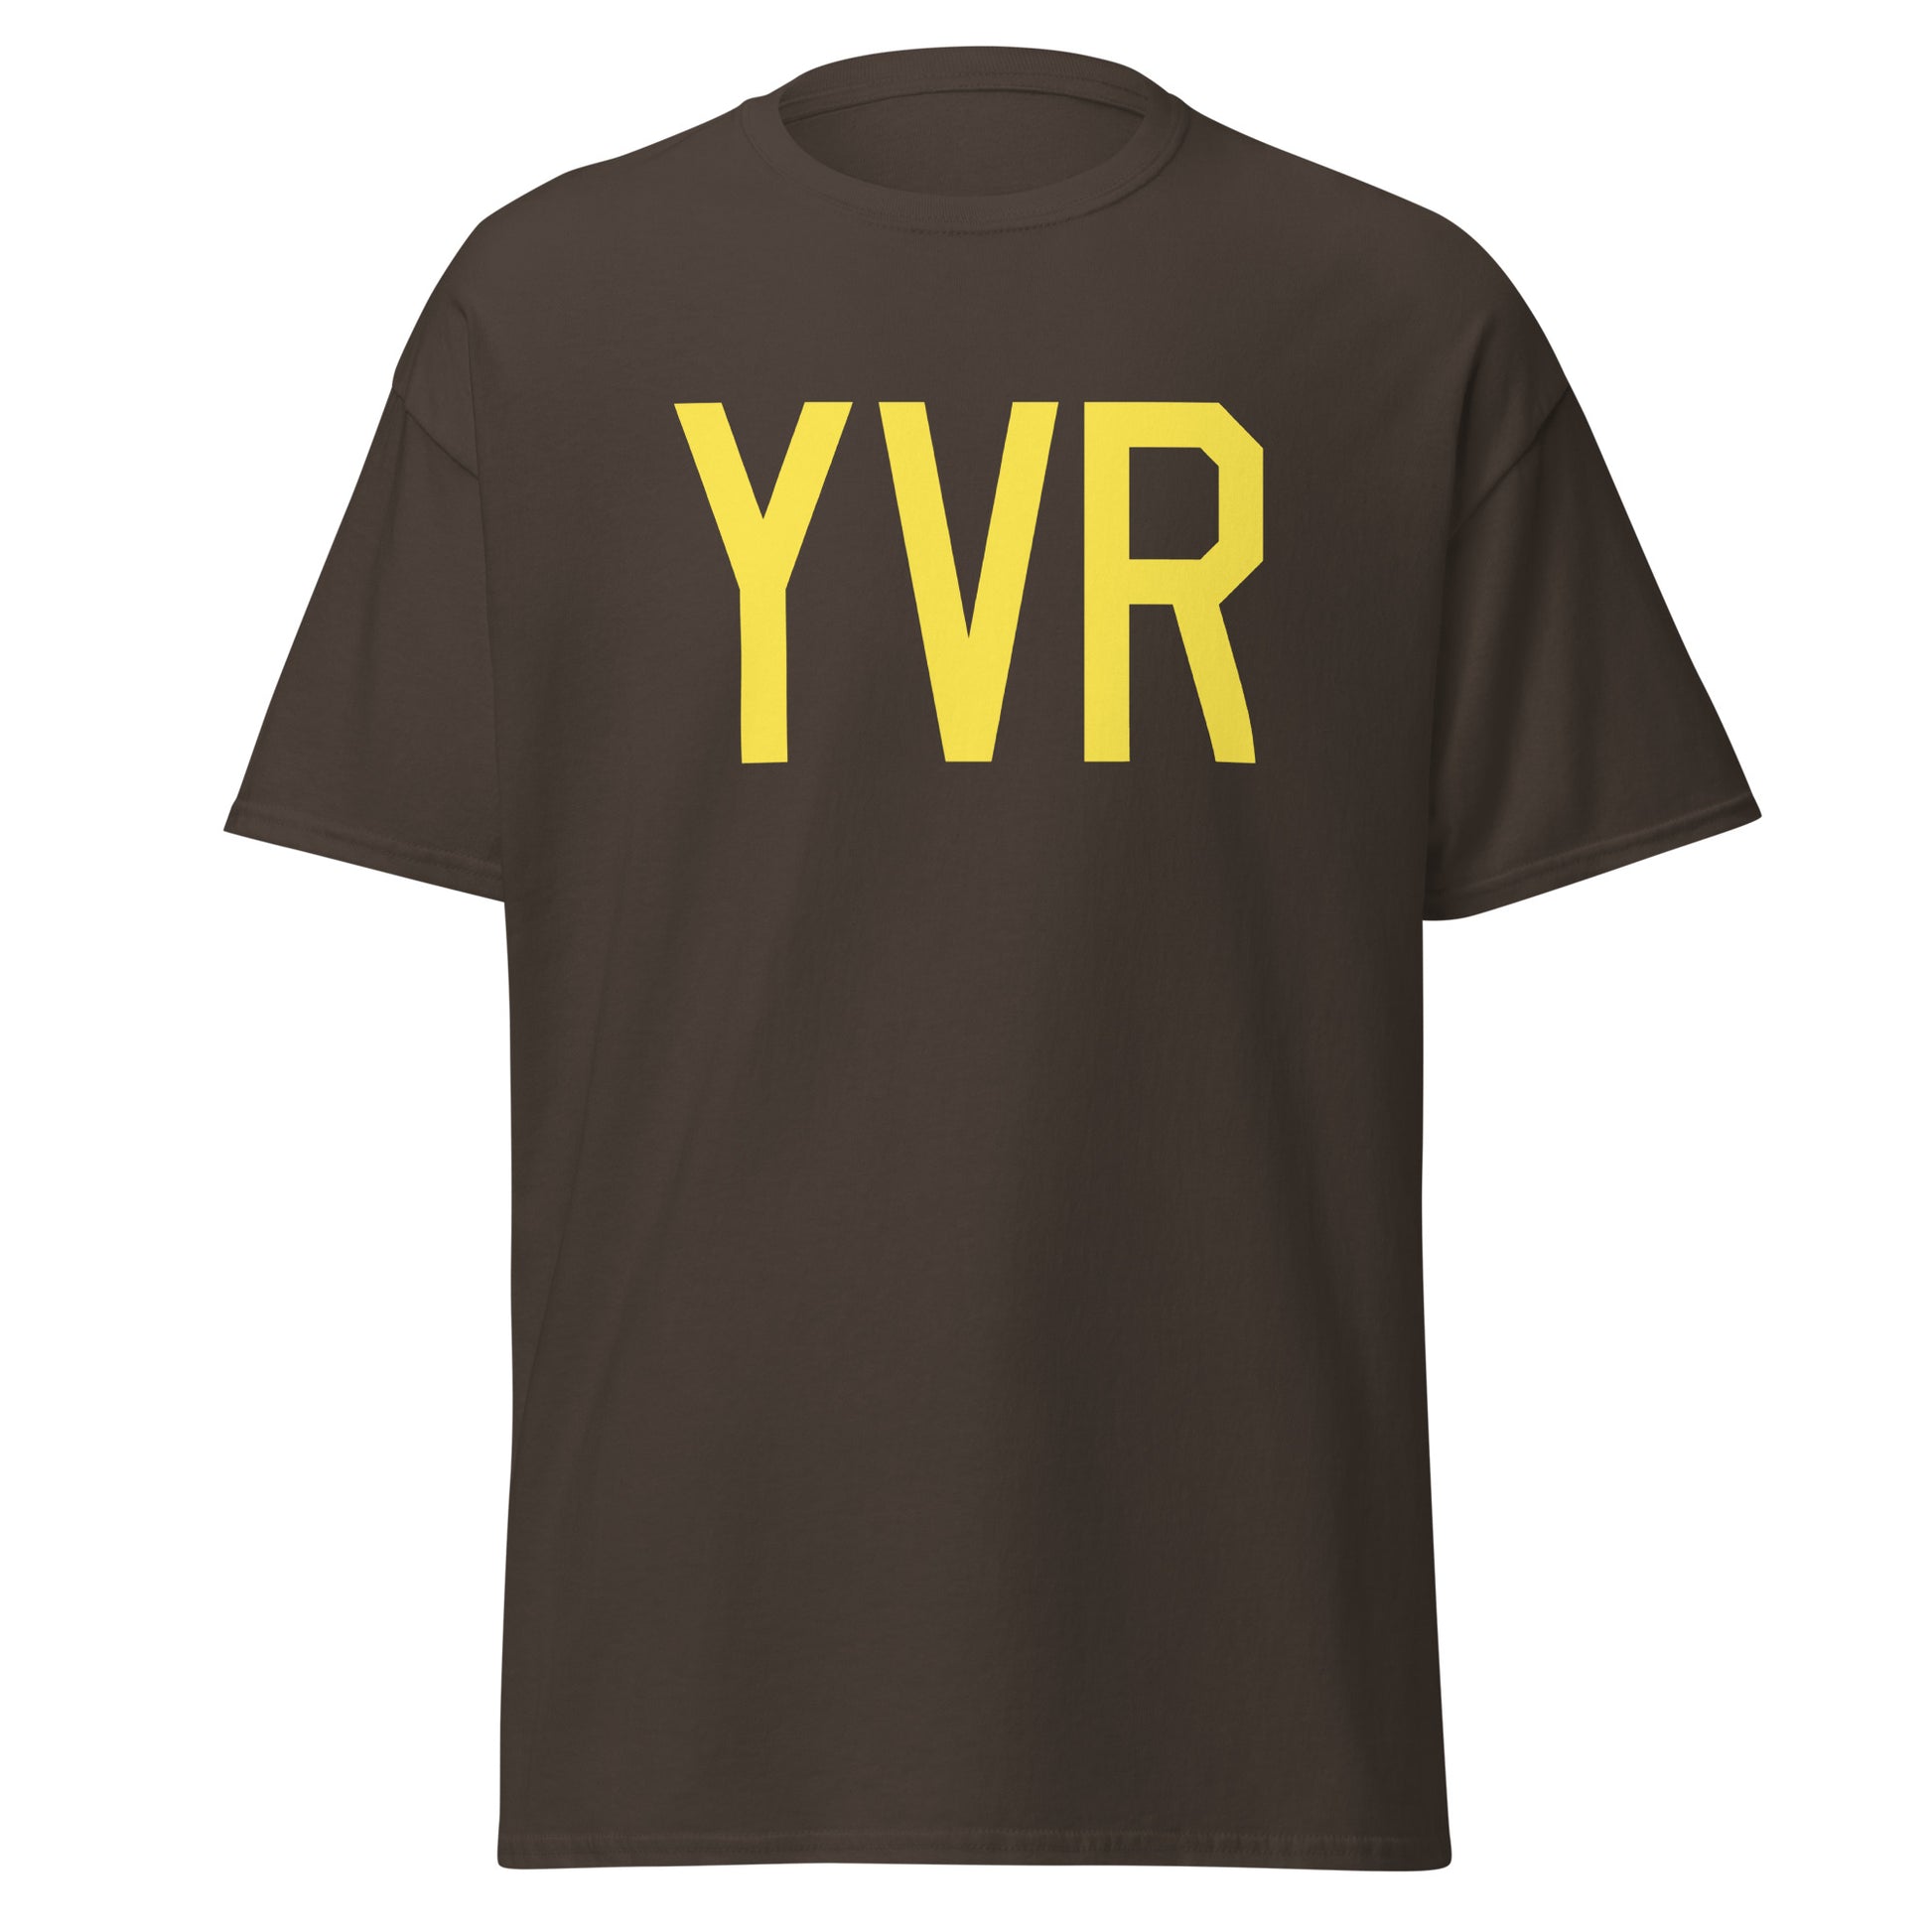 Aviation-Theme Men's T-Shirt - Yellow Graphic • YVR Vancouver • YHM Designs - Image 05